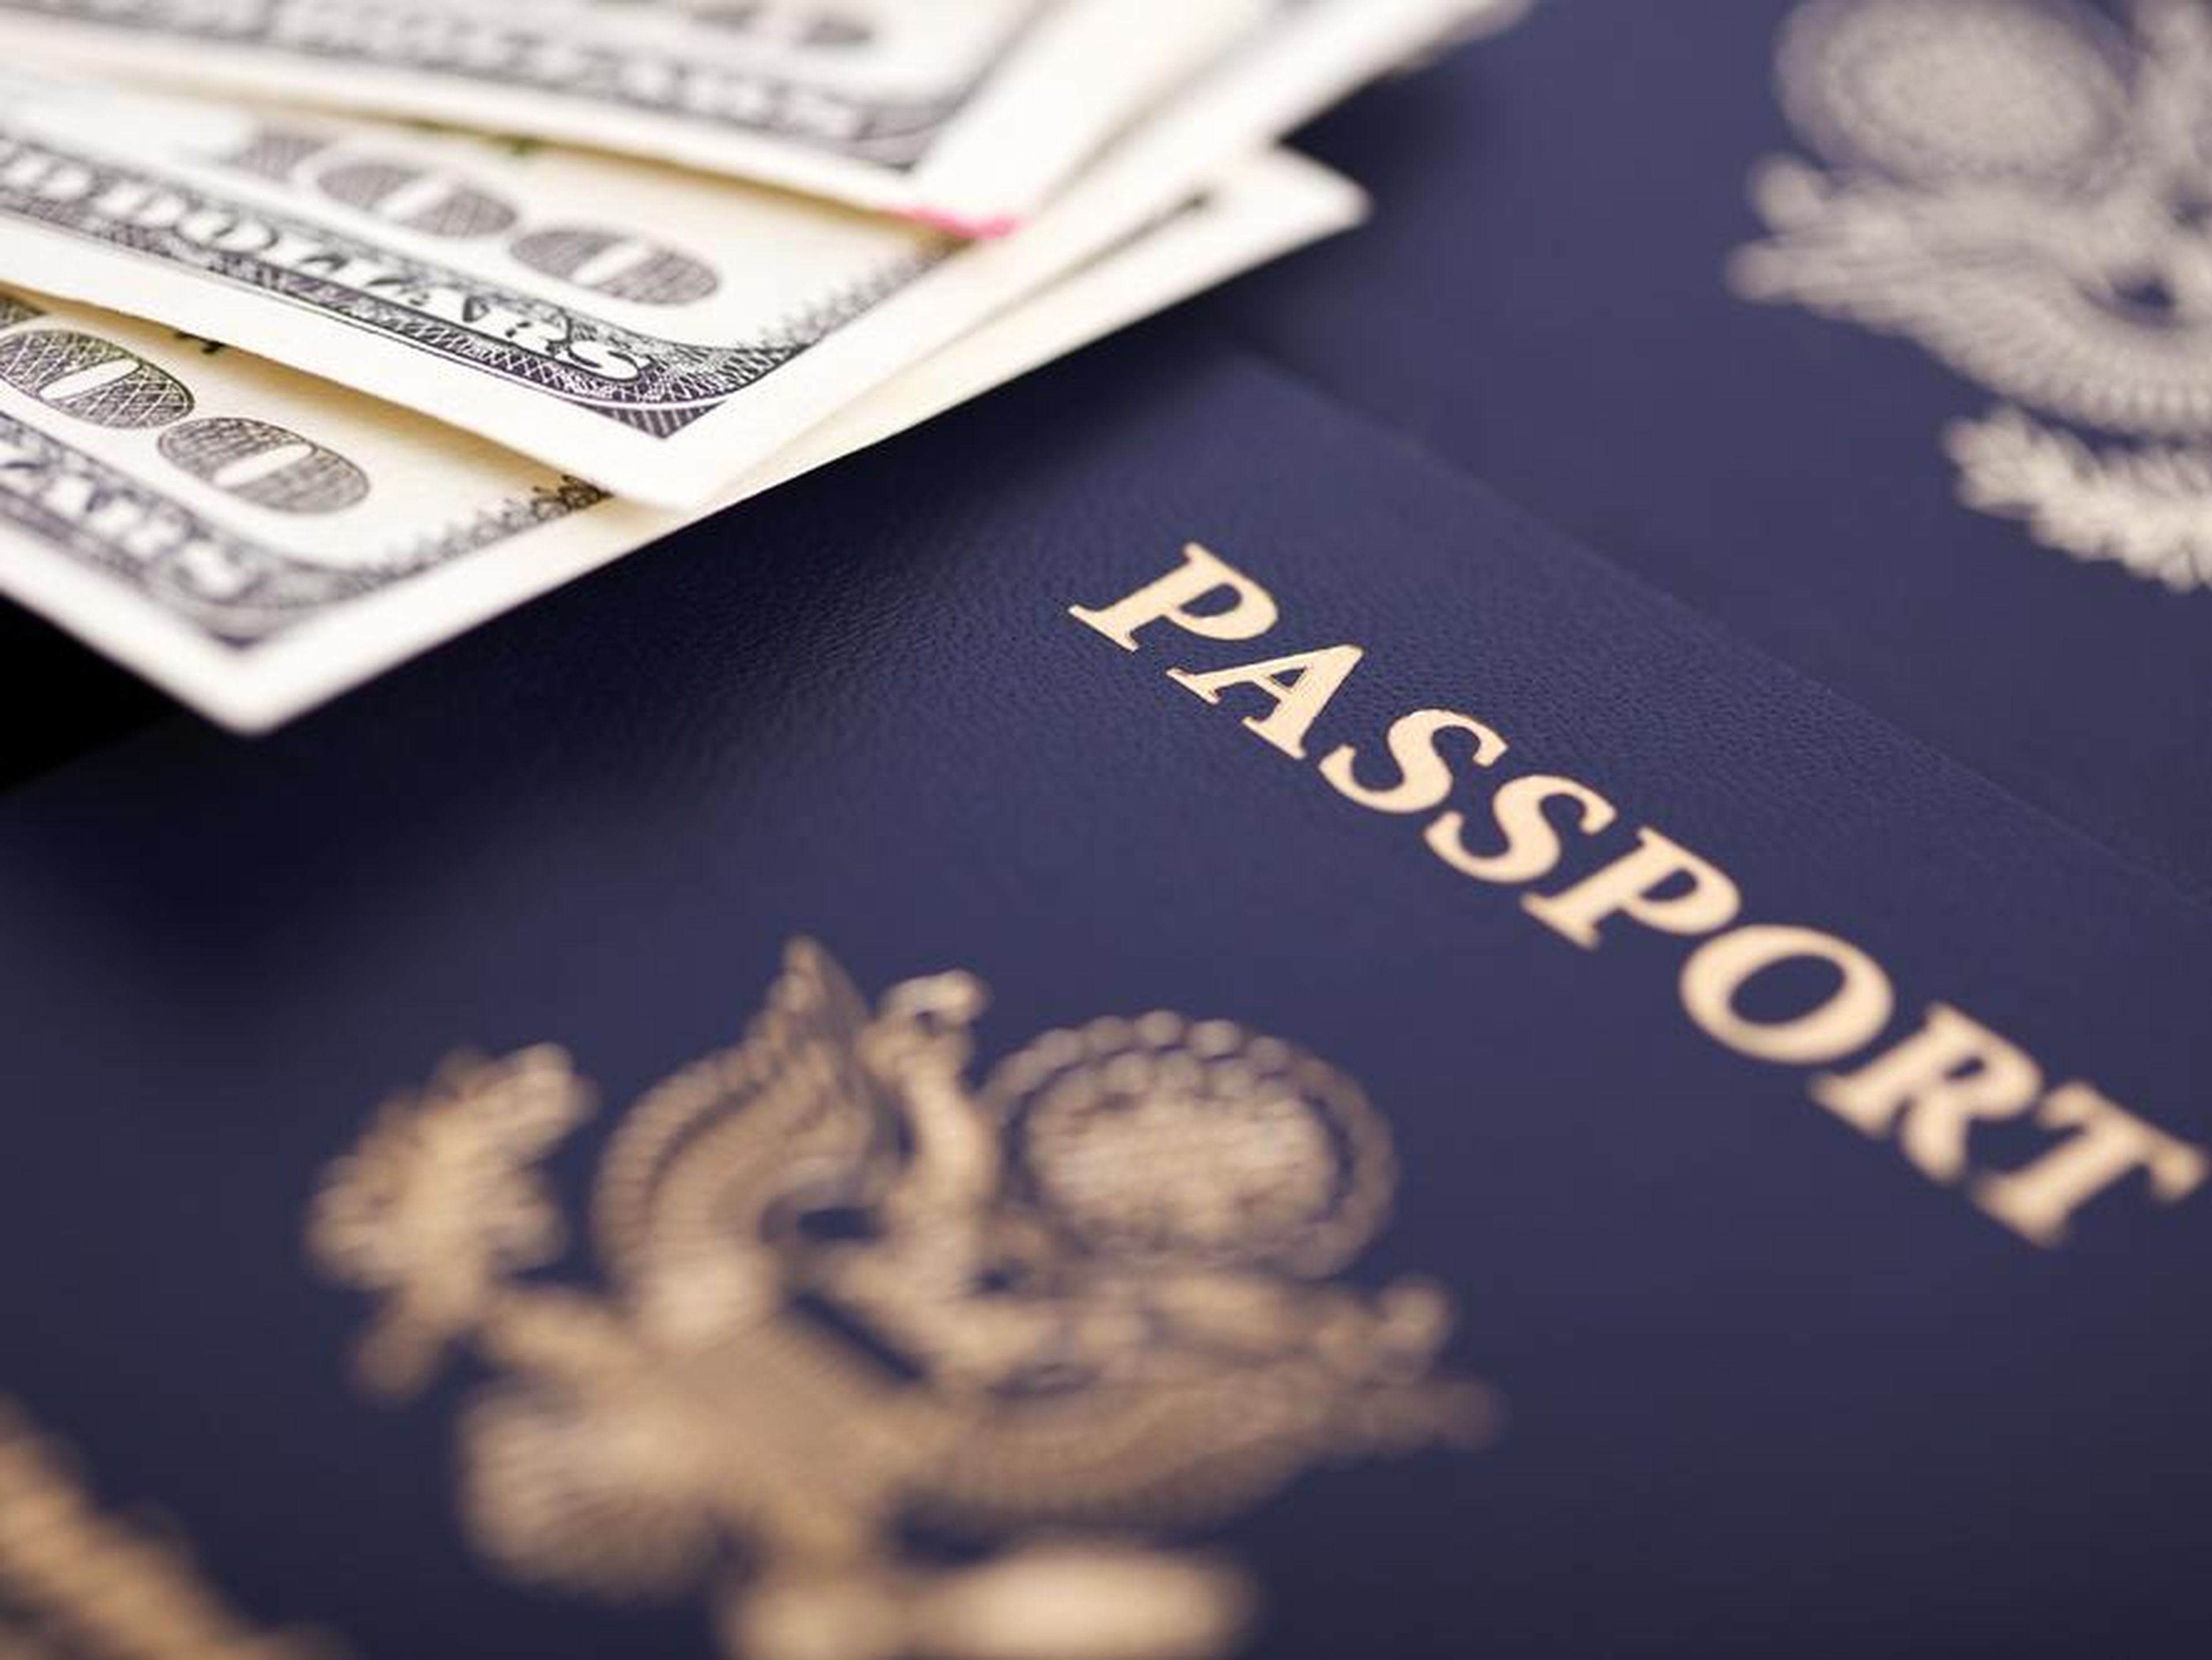 There's more than one type of passport. Find out which one you should get.